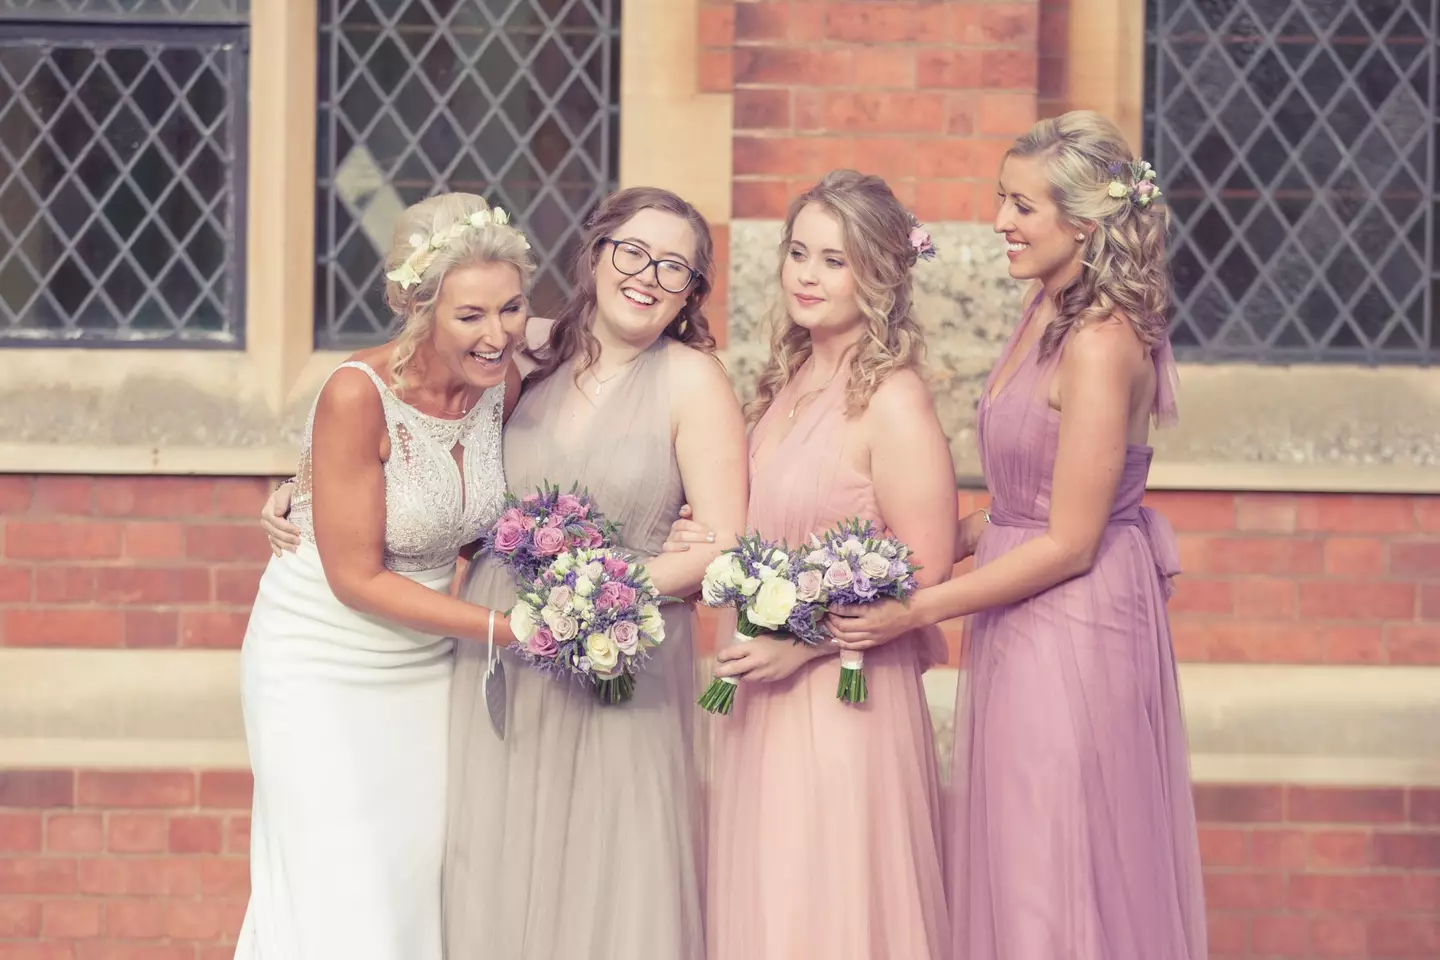 Unsurprisingly, the bridesmaids were not impressed by the text (stock photo).